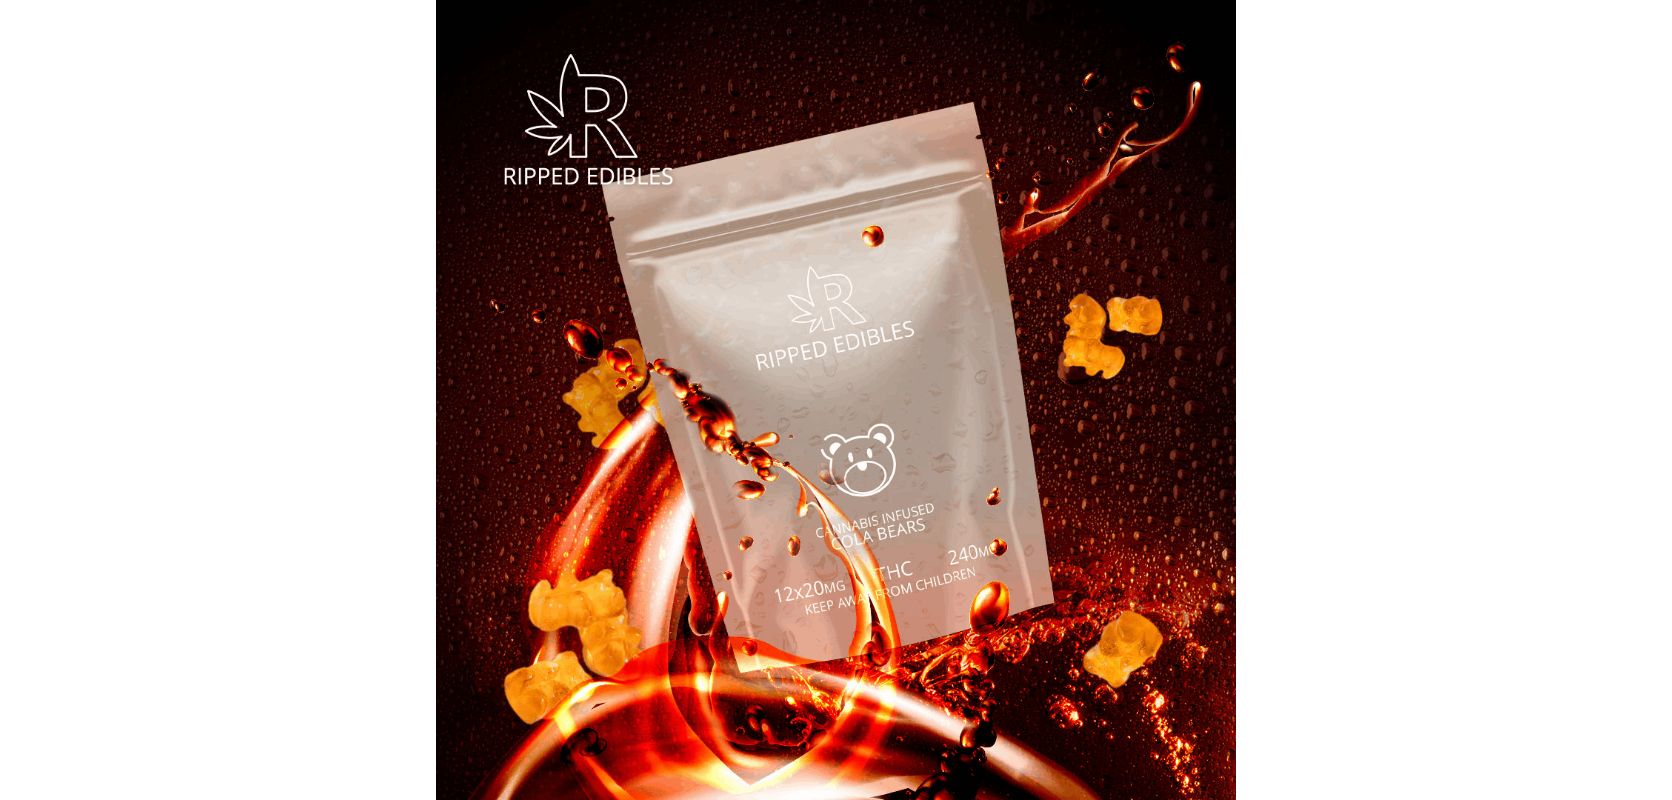 The Ripped Edibles – Cola Bears 240mg THC are outstanding cannabis edibles that pack a punch for recreational and medical cannabis users. 